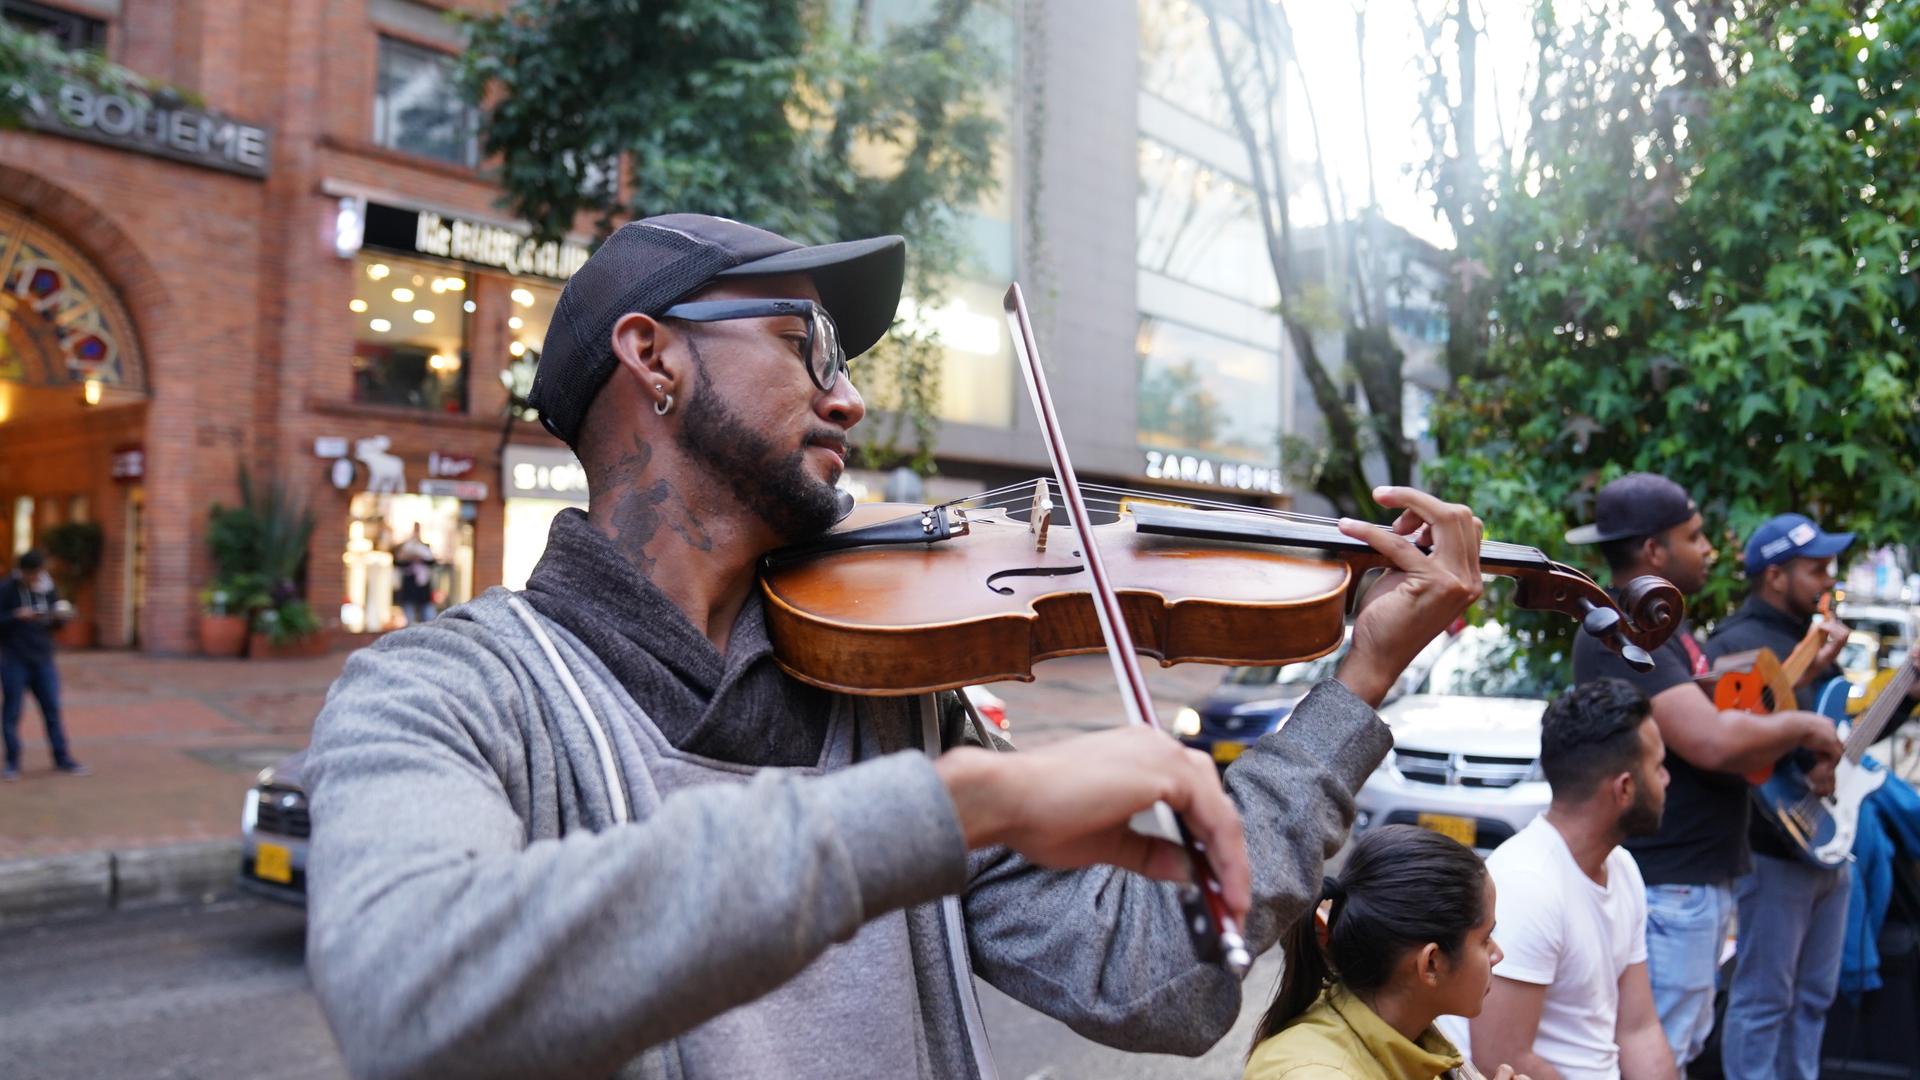 A young man with a neck tattoo and baseball cap plays violin on the street. 